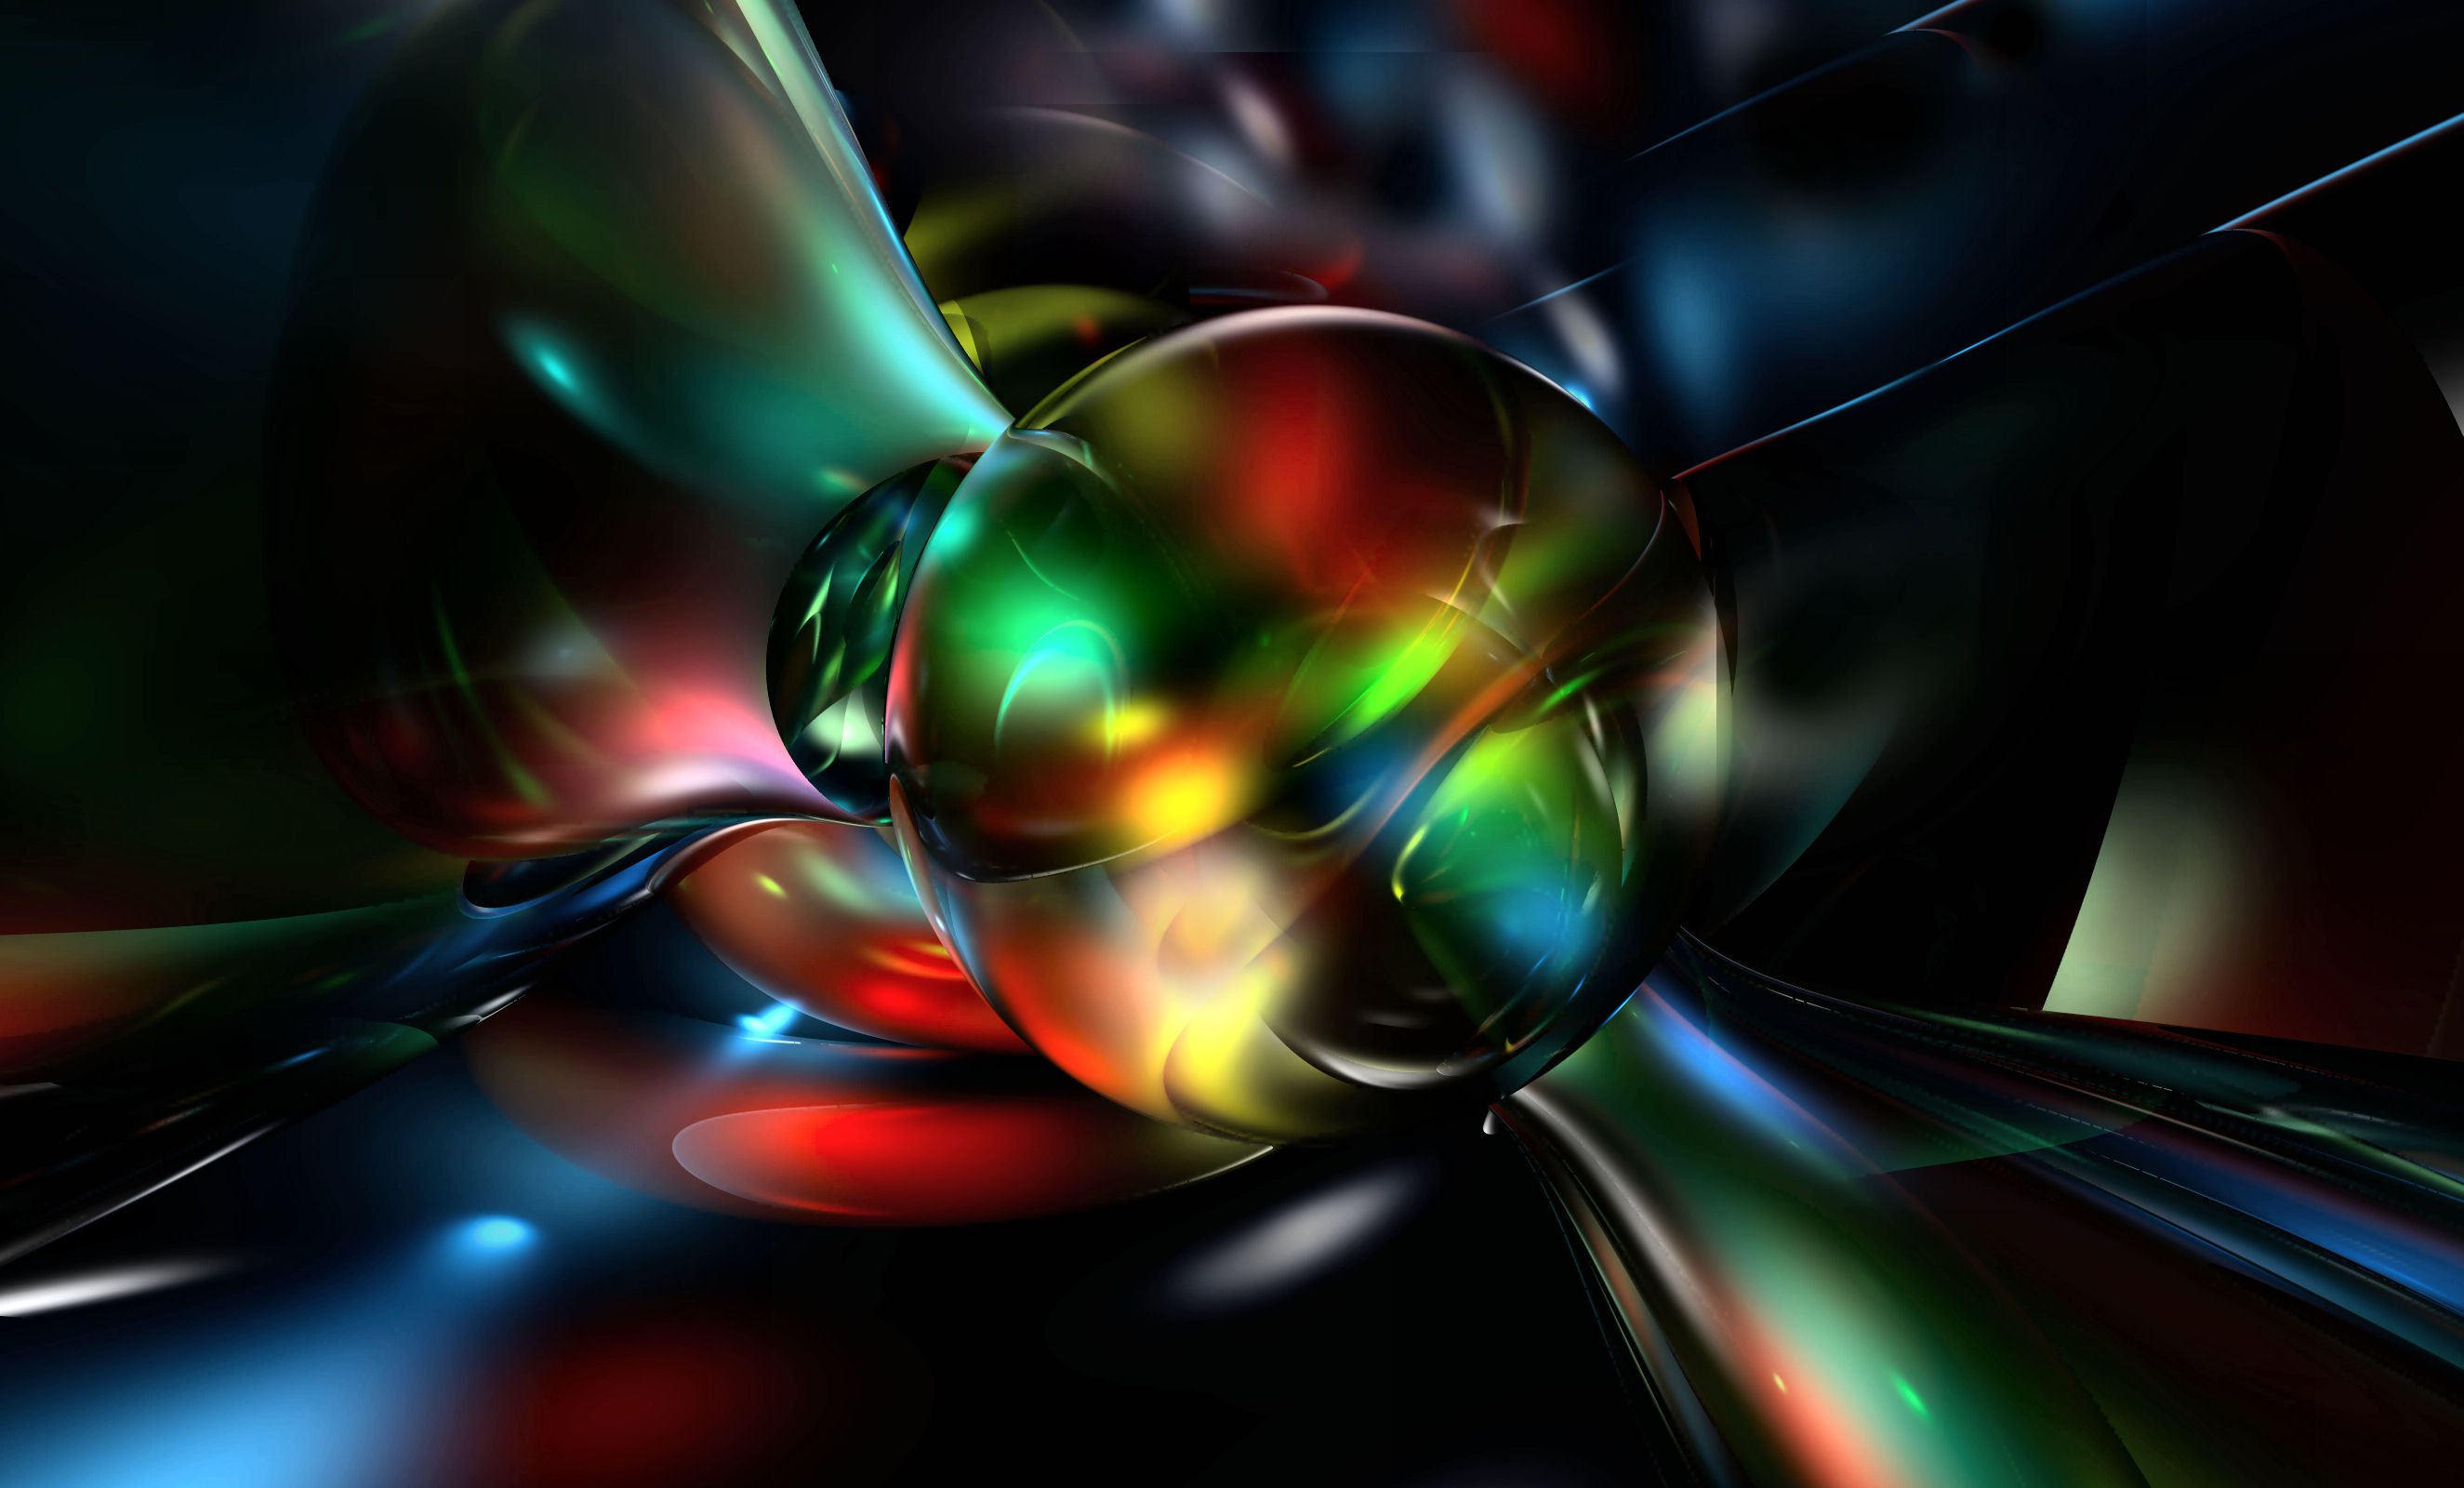  really cool awesome abstract 3d desktop wallpaper Car Pictures 2650x1600